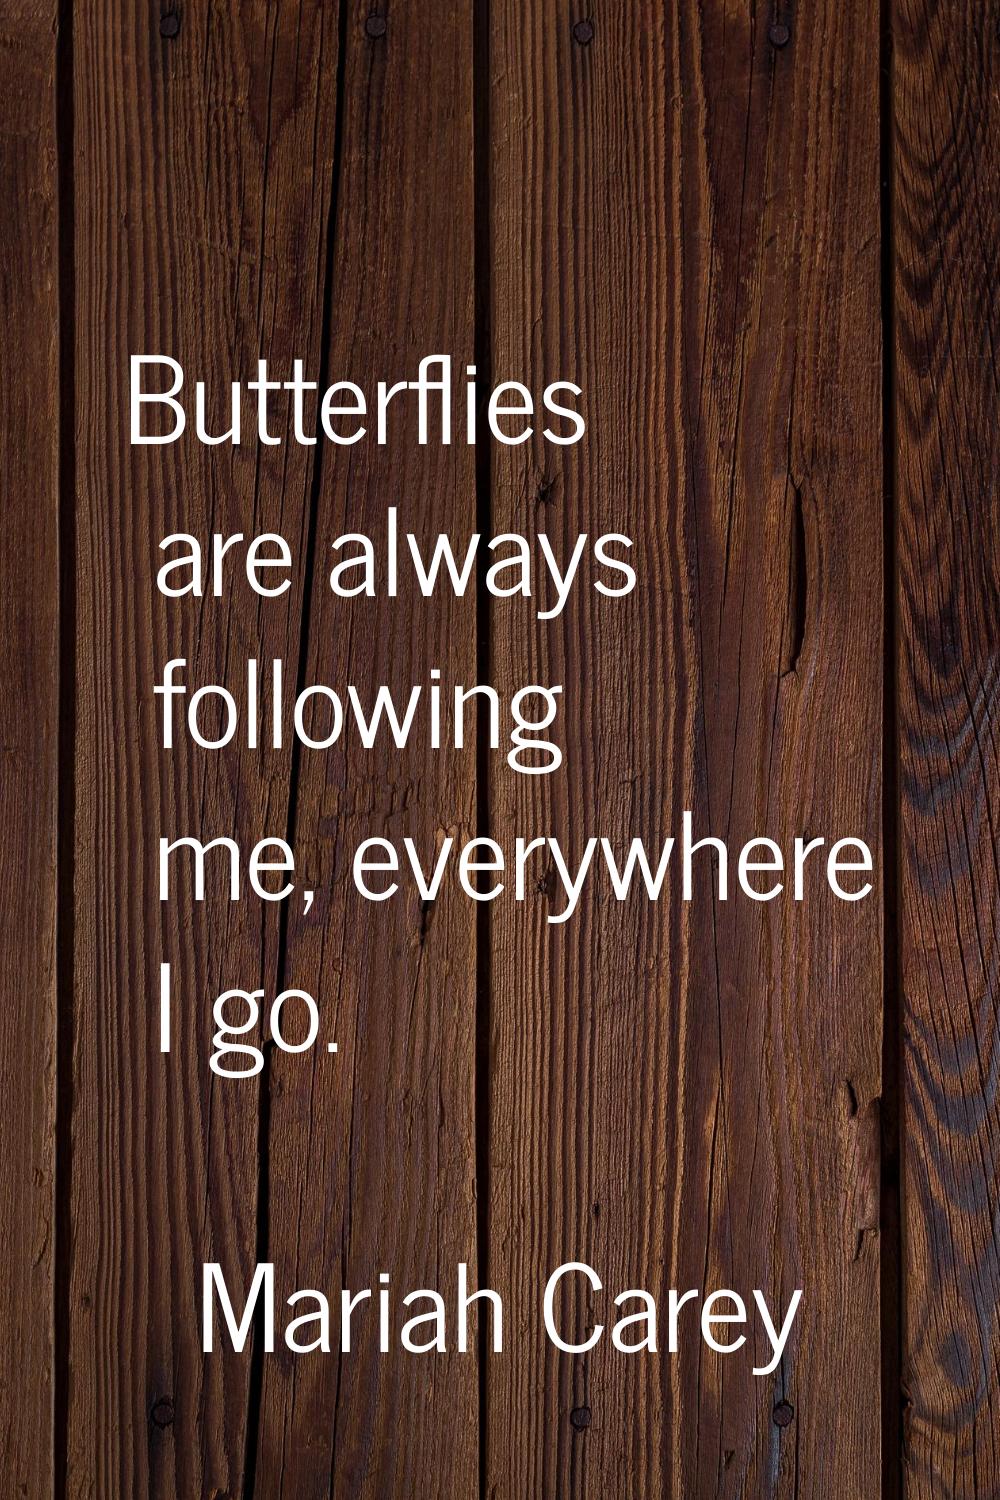 Butterflies are always following me, everywhere I go.